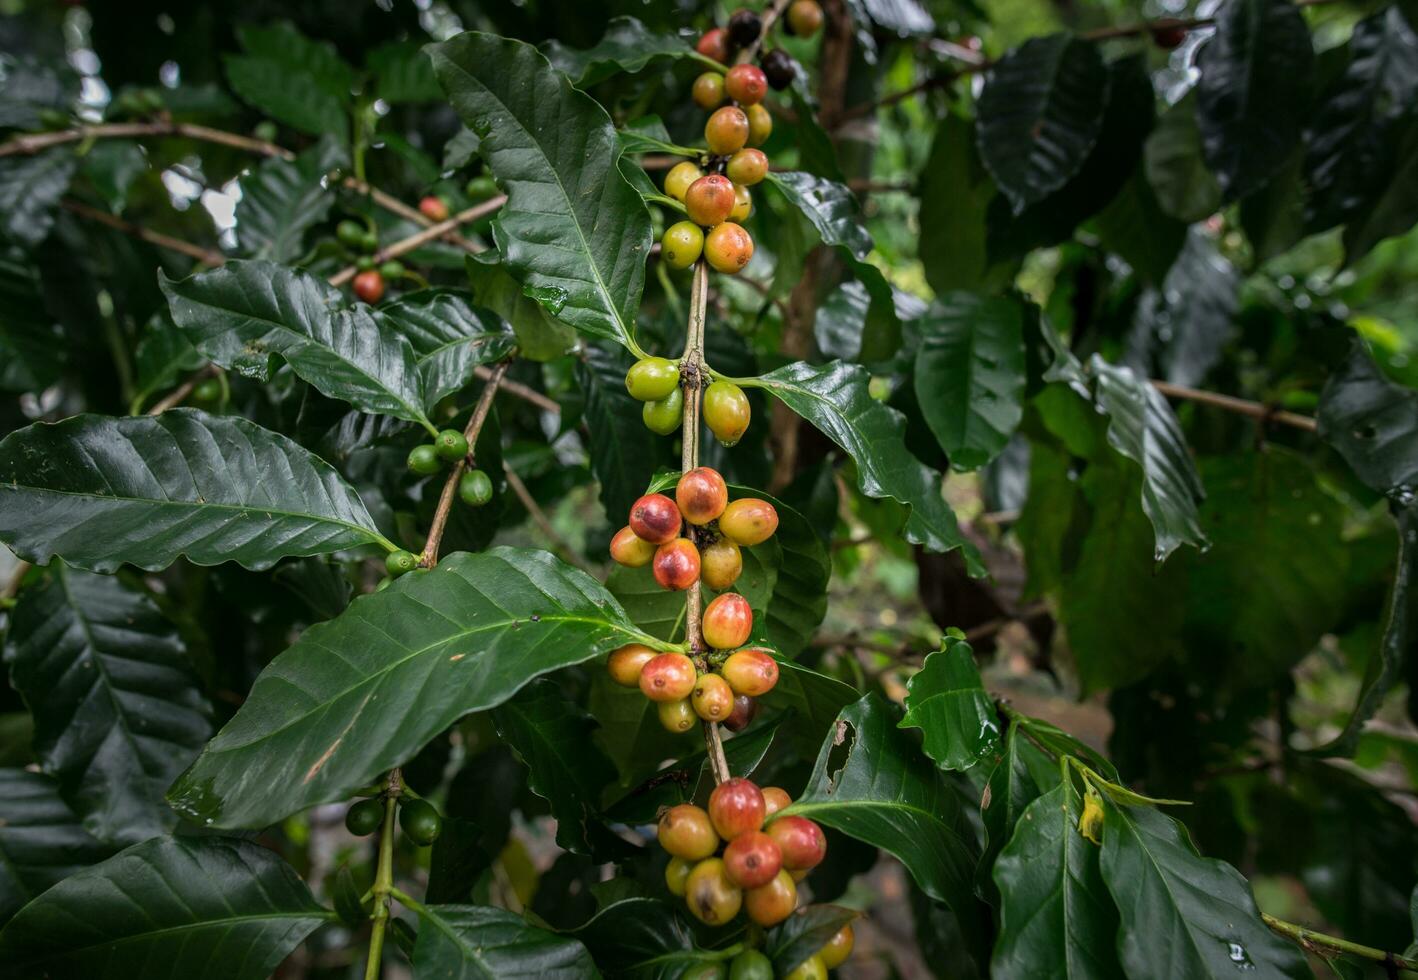 Coffea tree is a genus of flowering plants whose seeds, called coffee beans, are used to make various coffee beverages and products. photo